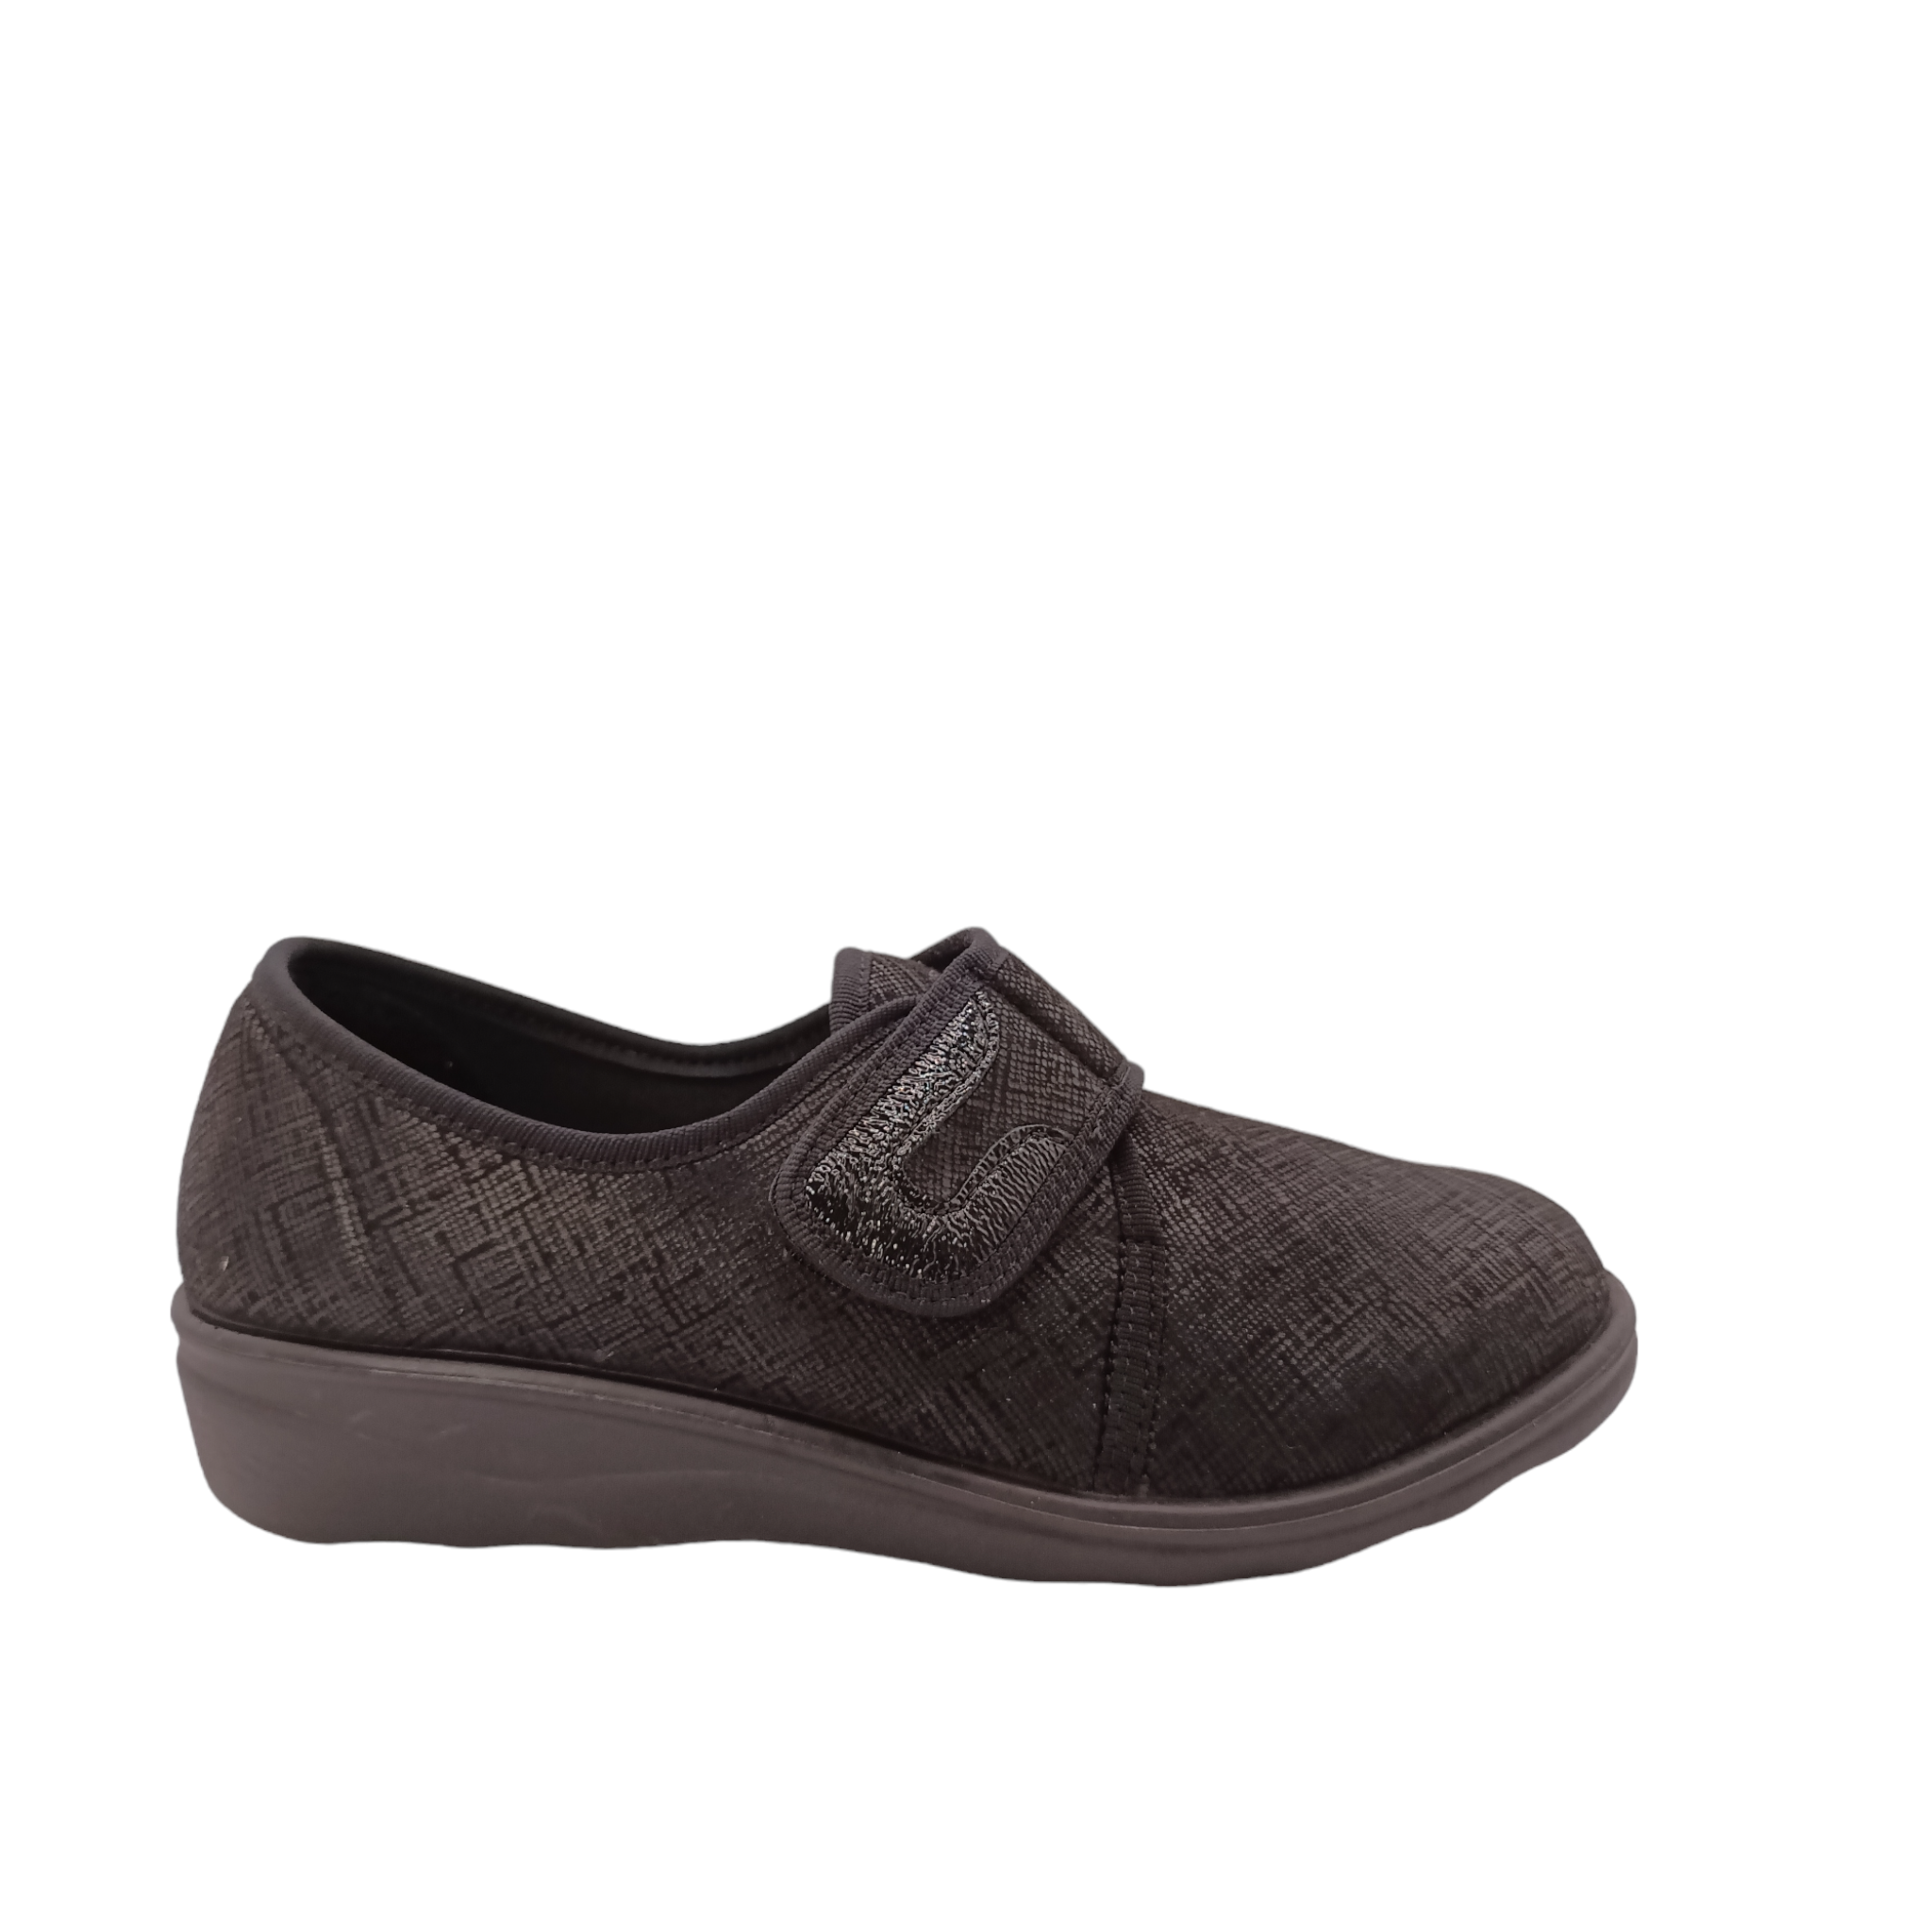 Shop Nice Josef Seibel - with shoe&amp;me - from Josef Seibel - Slippers - Slipper, Winter, Womens - [collection]